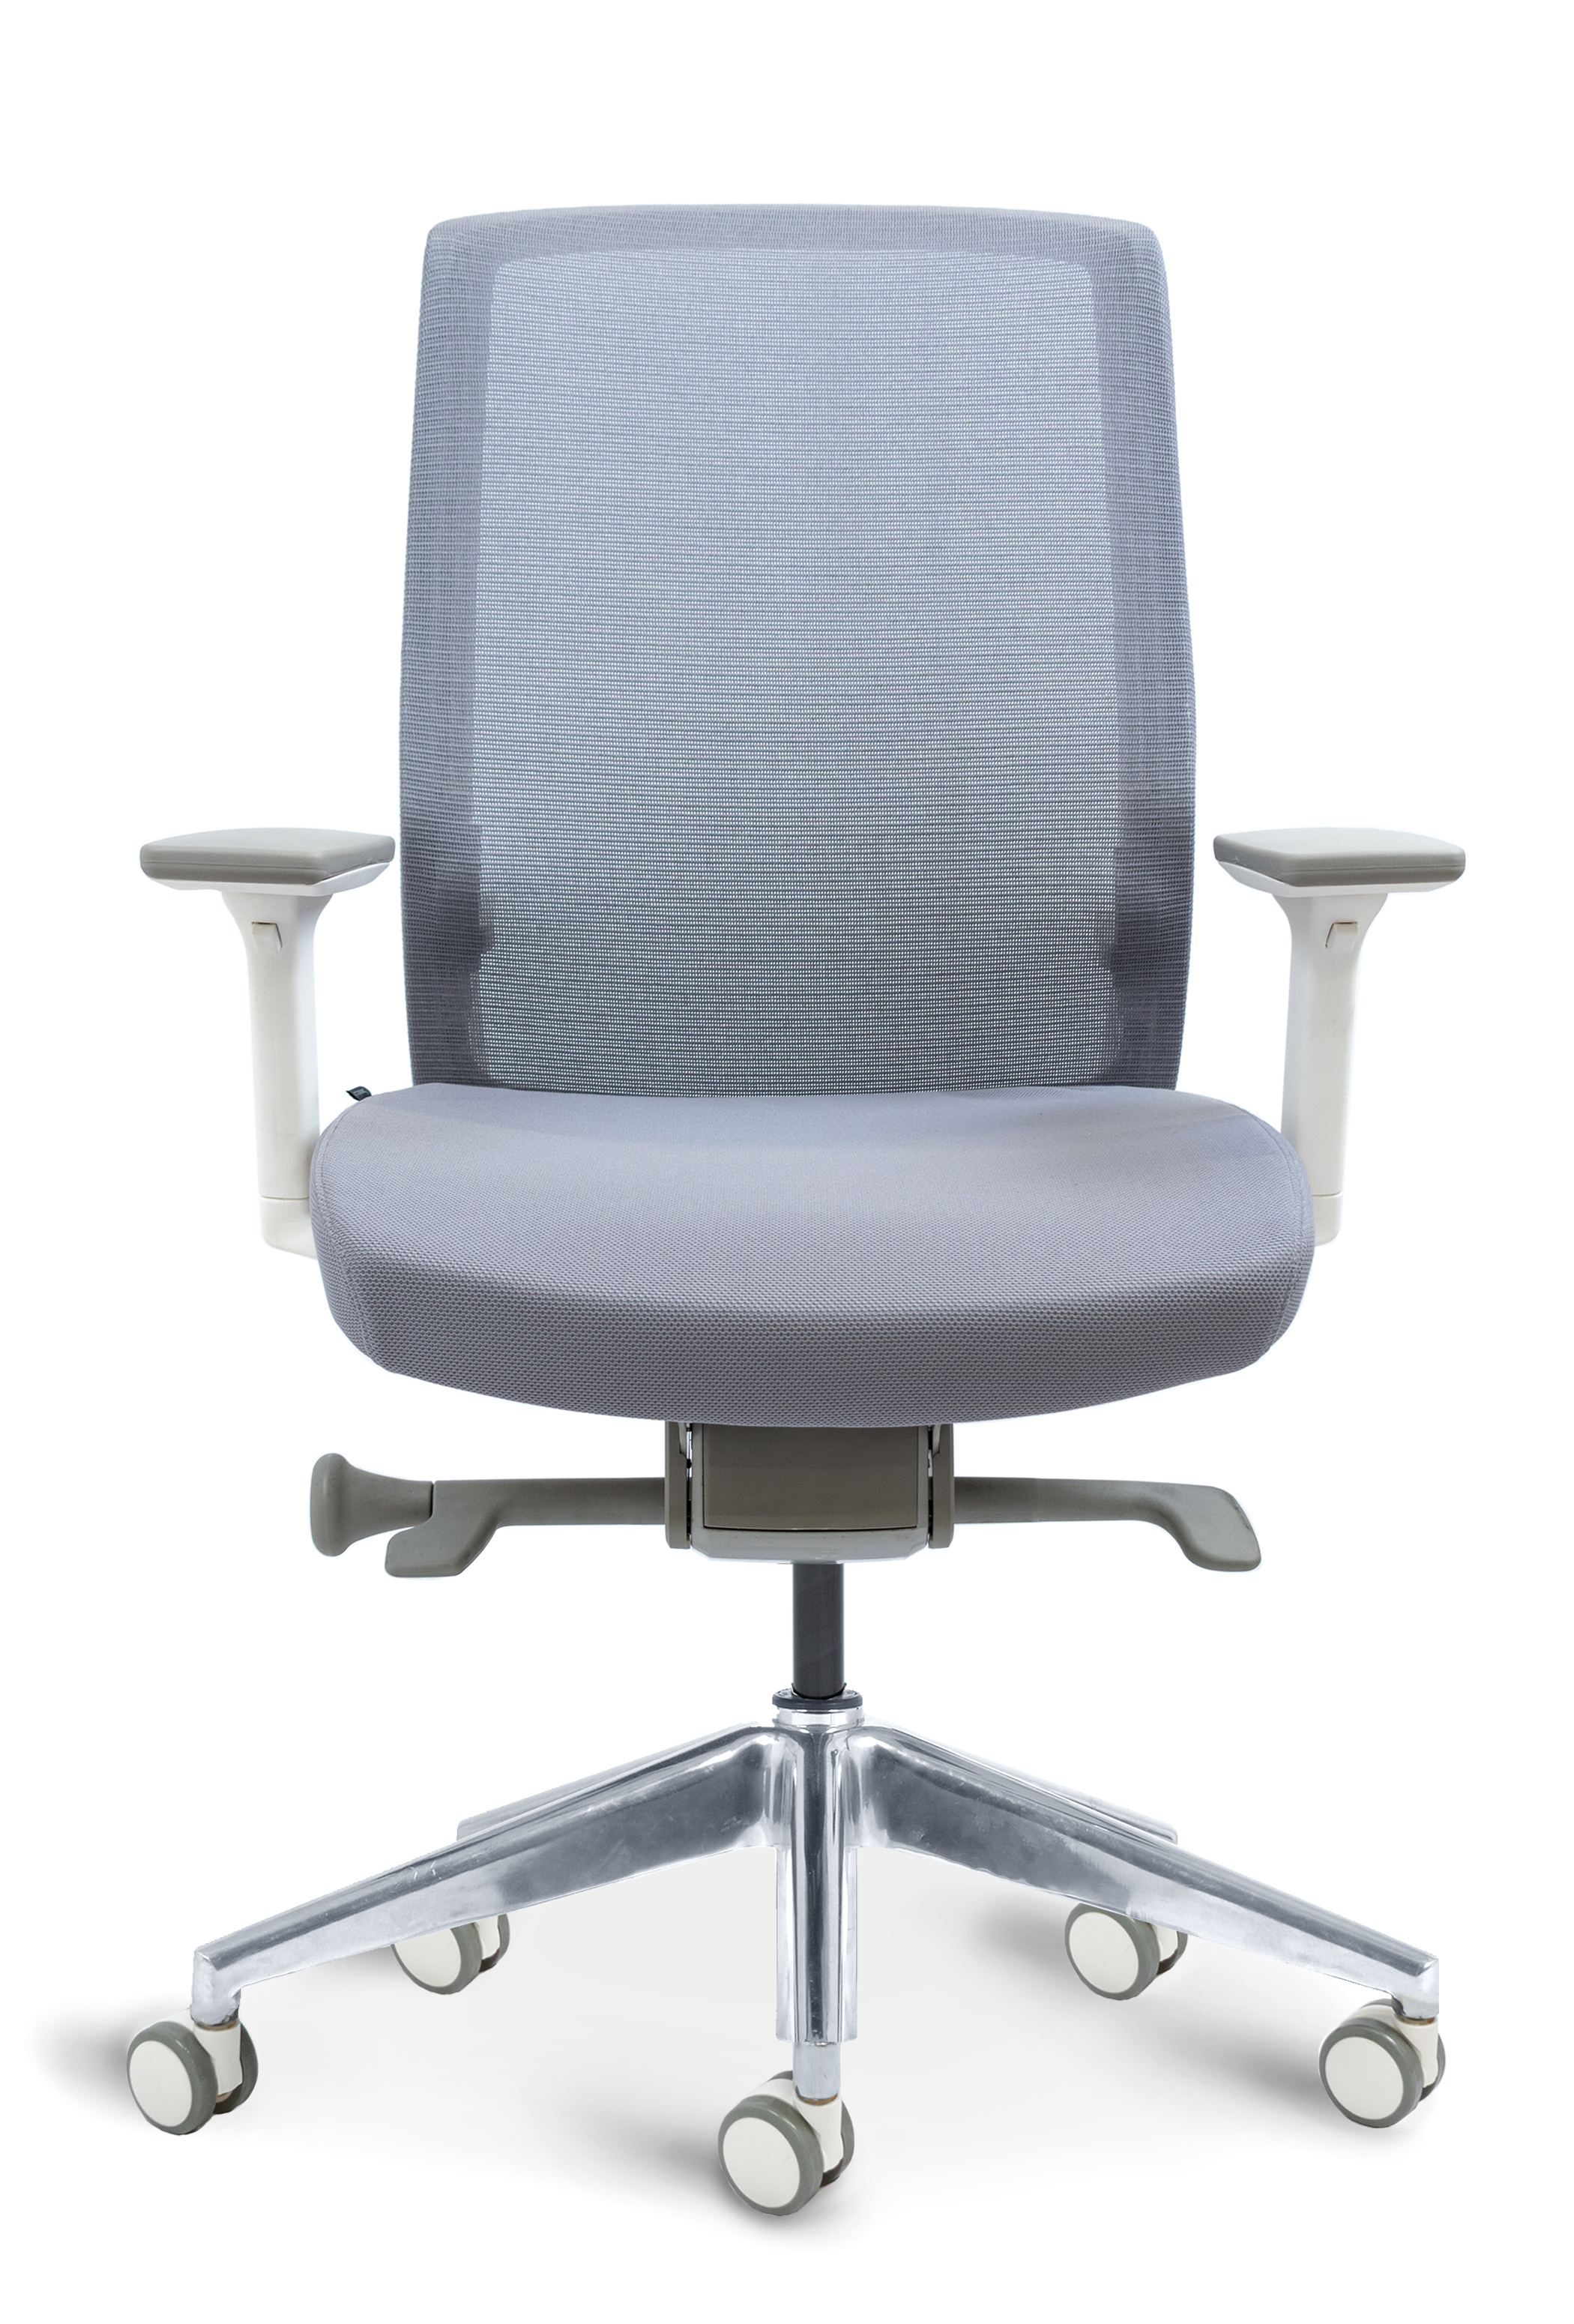 WS - J1 task chair - White (Front)